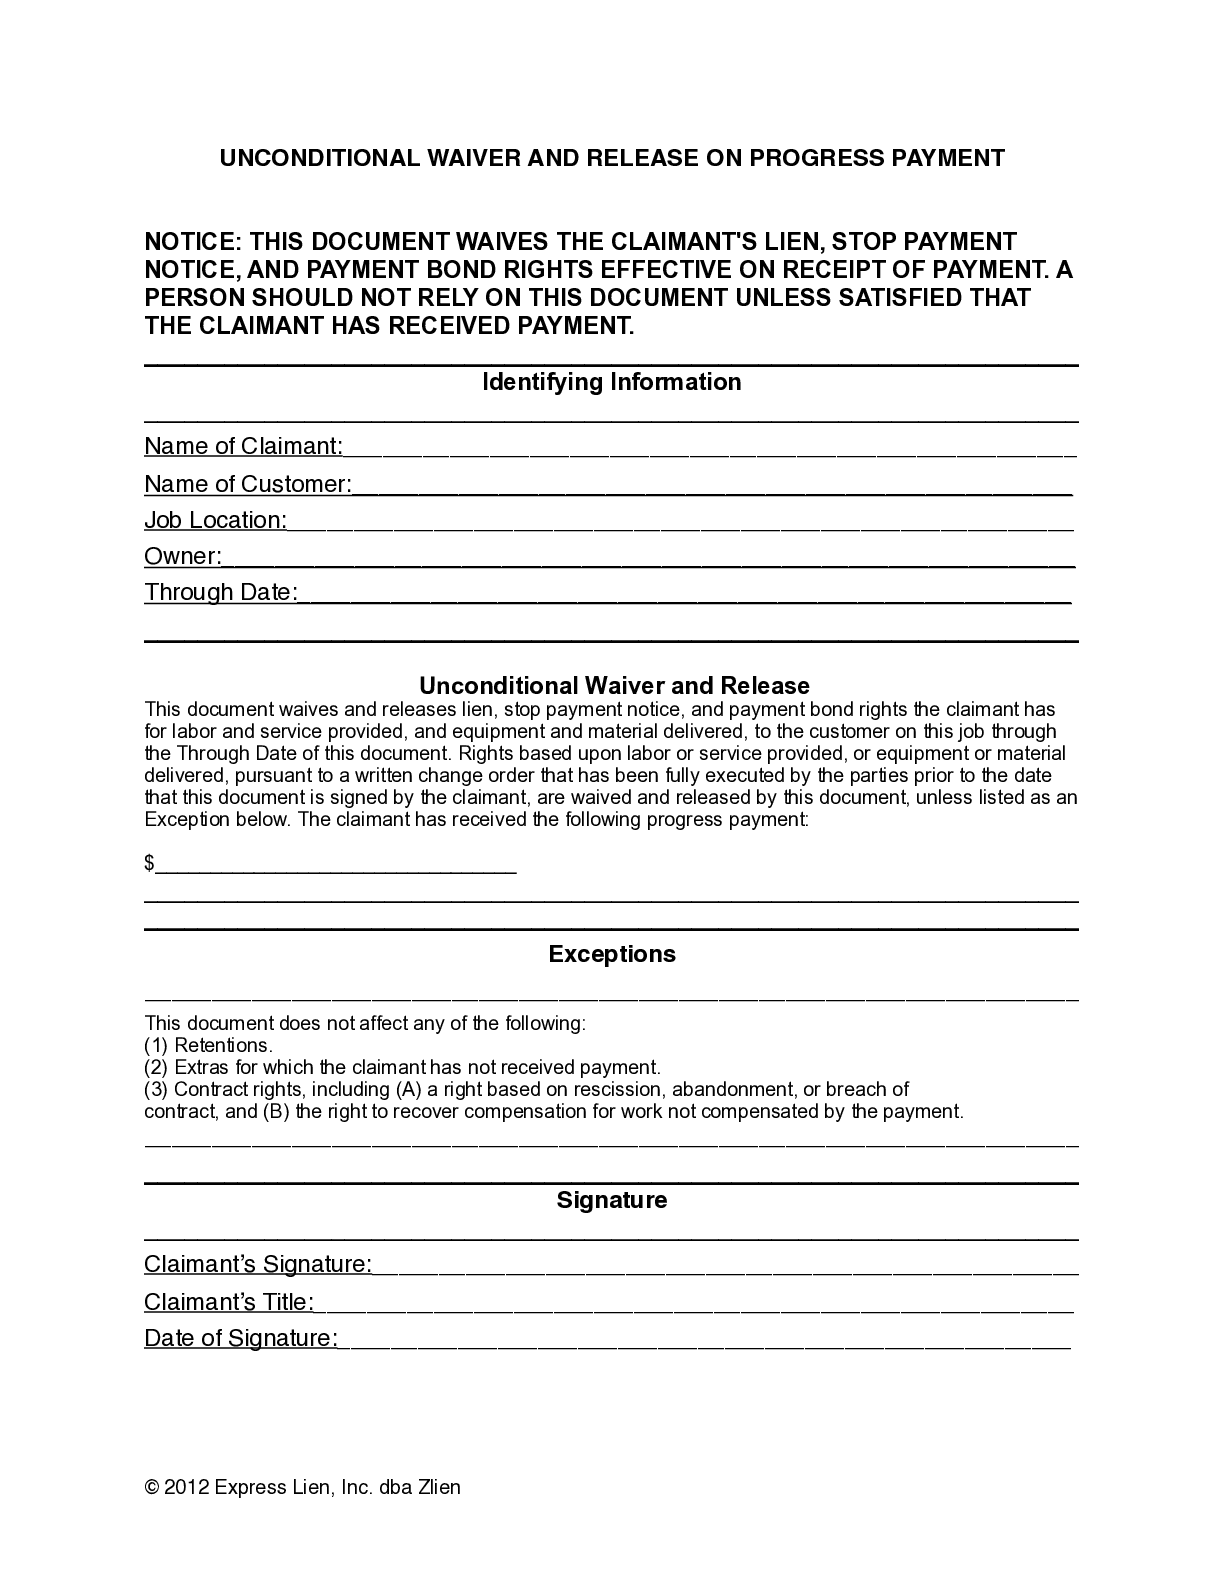 Idaho Partial Unconditional Lien Waiver Form - free from